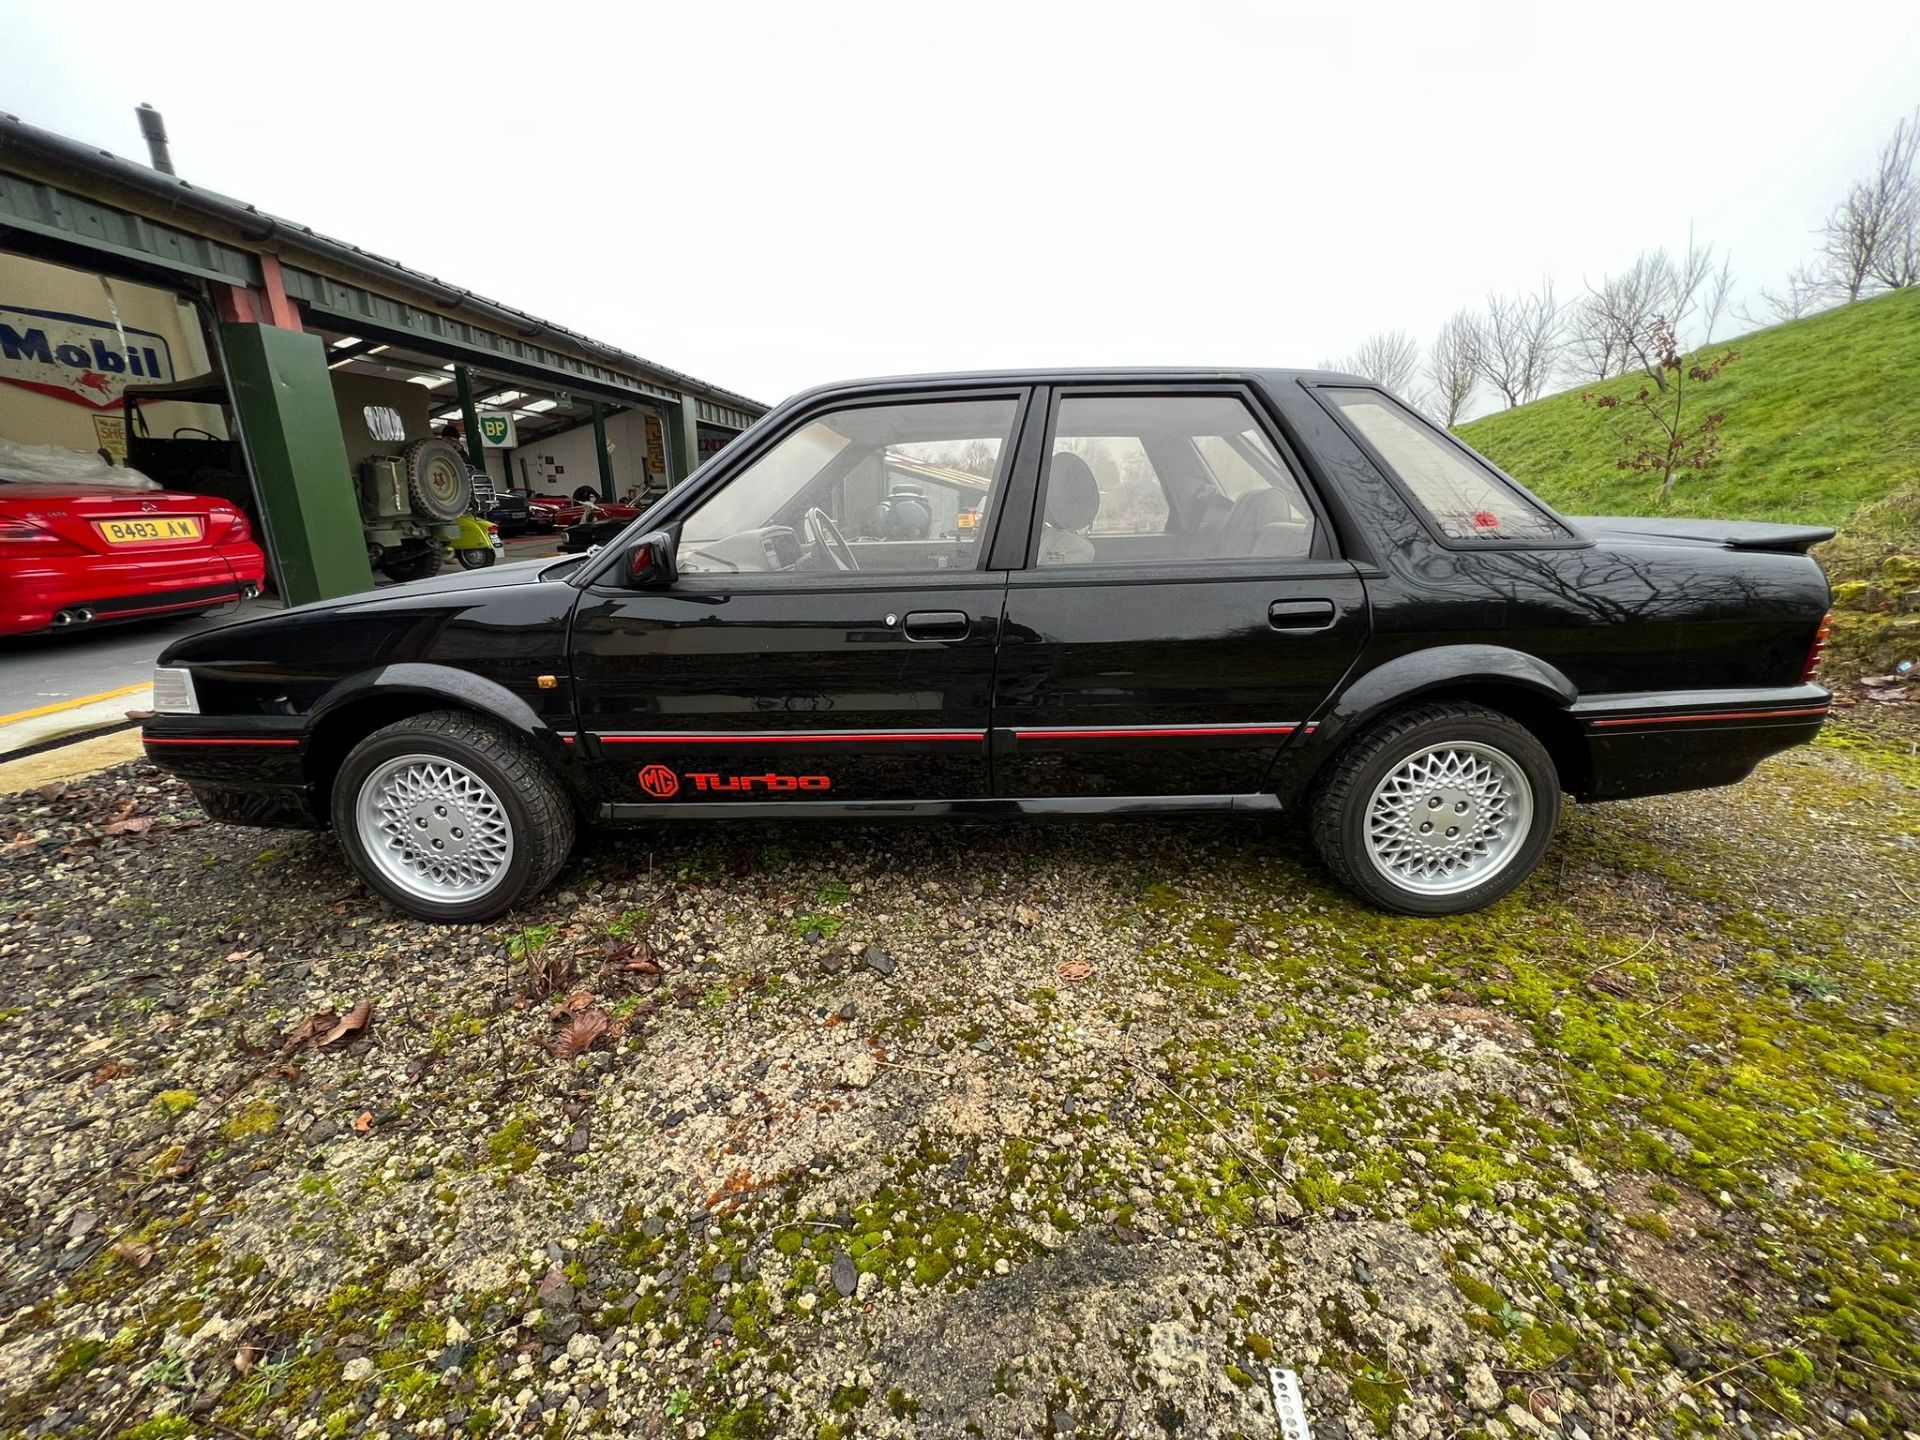 MG Bundle; MG Montego Turbo 1988, Rover MG Maestro Turbo 1990, and an MG Turbo engine and gearbox. - Image 4 of 30